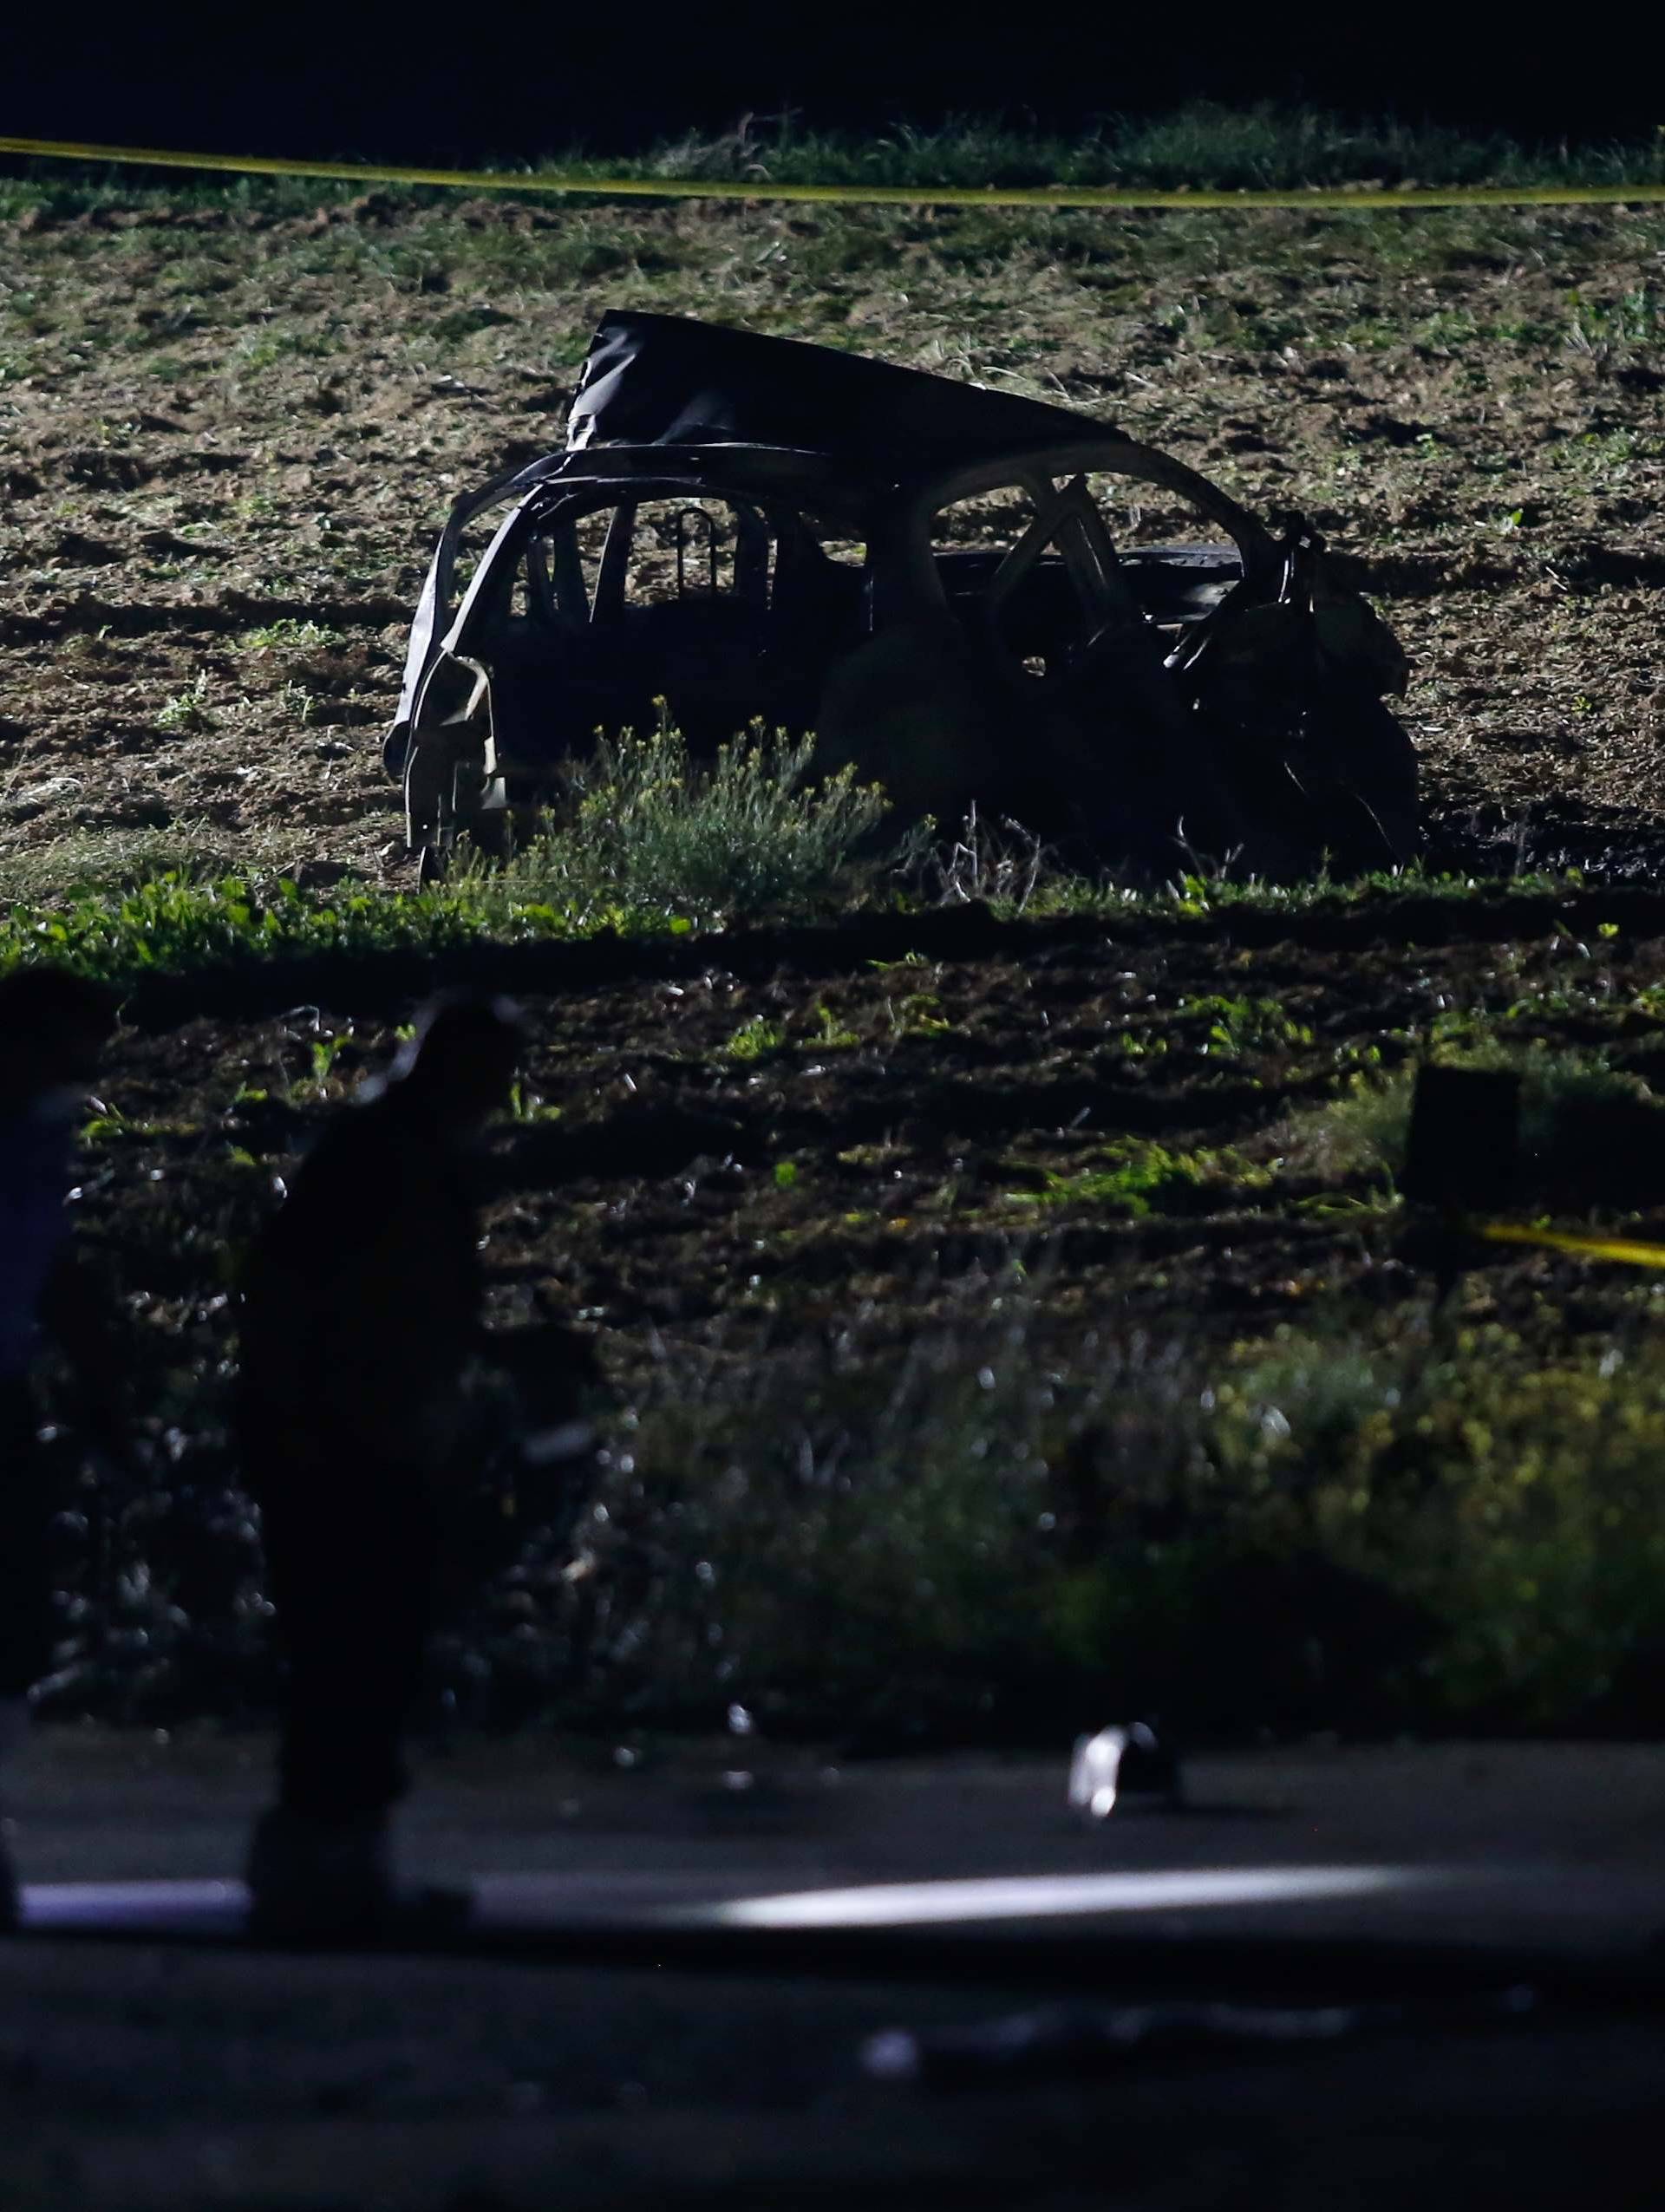 Forensic experts use lights as they look for evidence on a road after a powerful bomb blew up a car killing investigative journalist Daphne Caruana Galizia in Bidnija